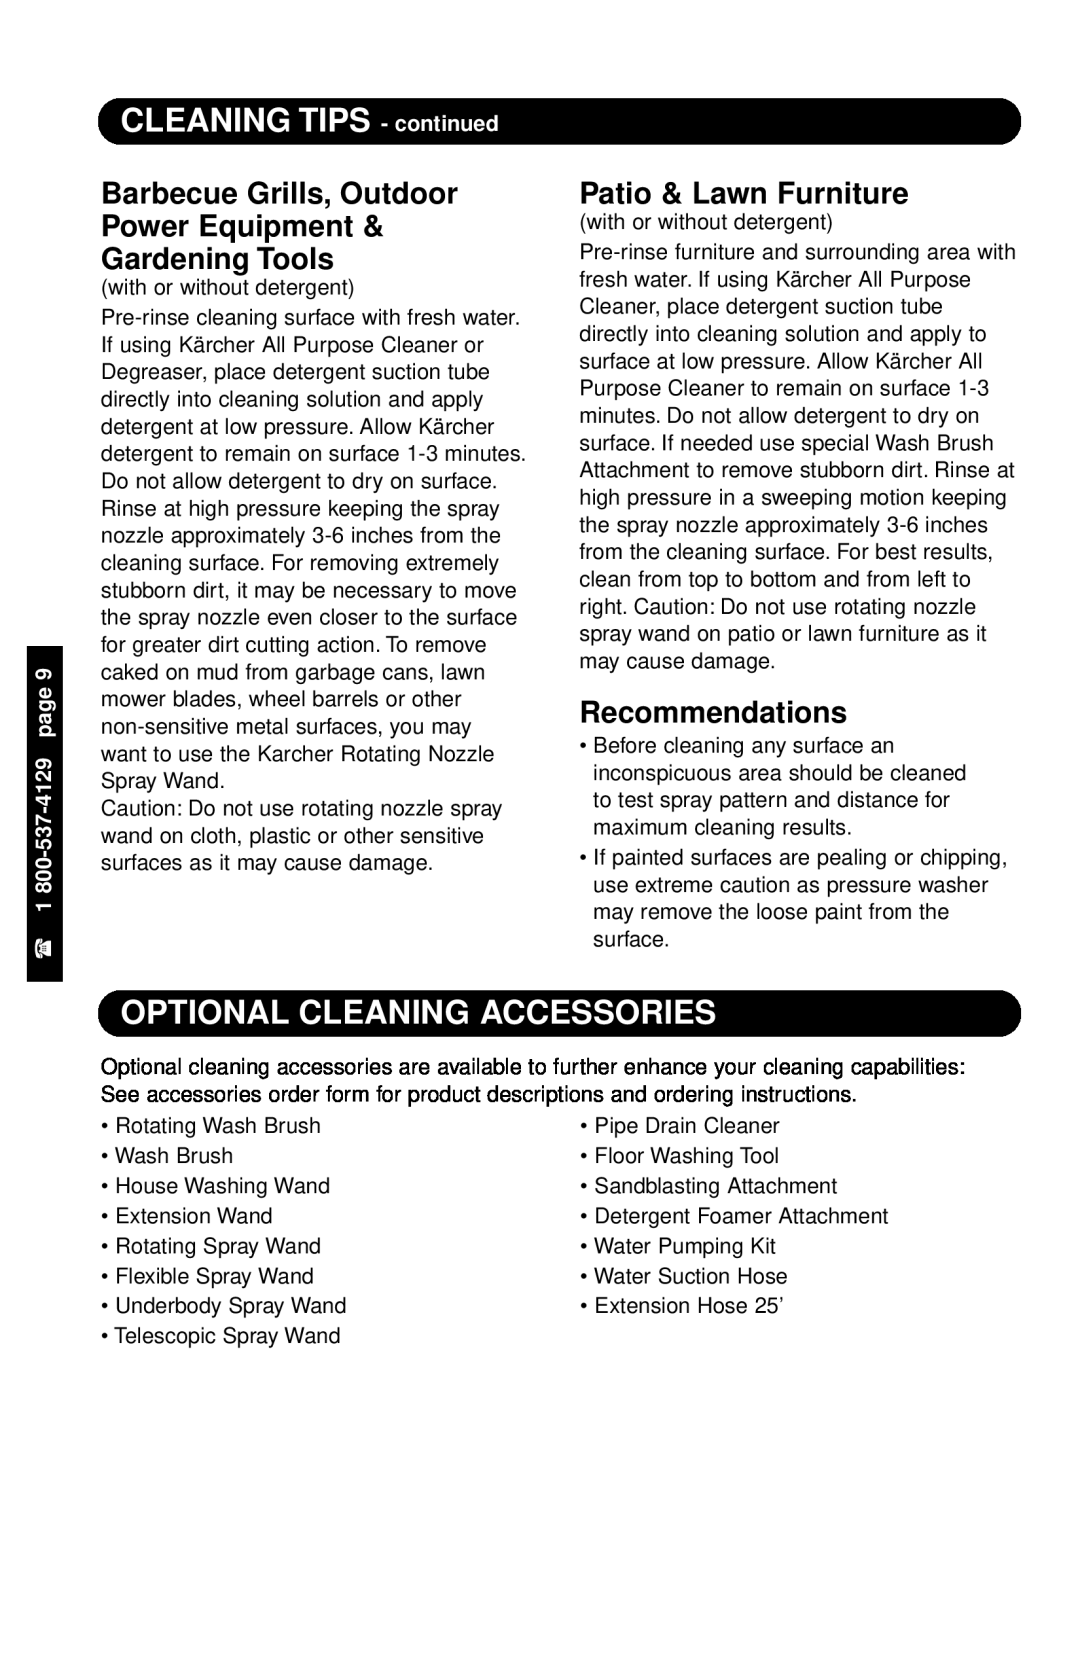 Karcher K 2200 G CLEANING TIPS - continued, Optional Cleaning Accessories, Patio & Lawn Furniture, Recommendations 